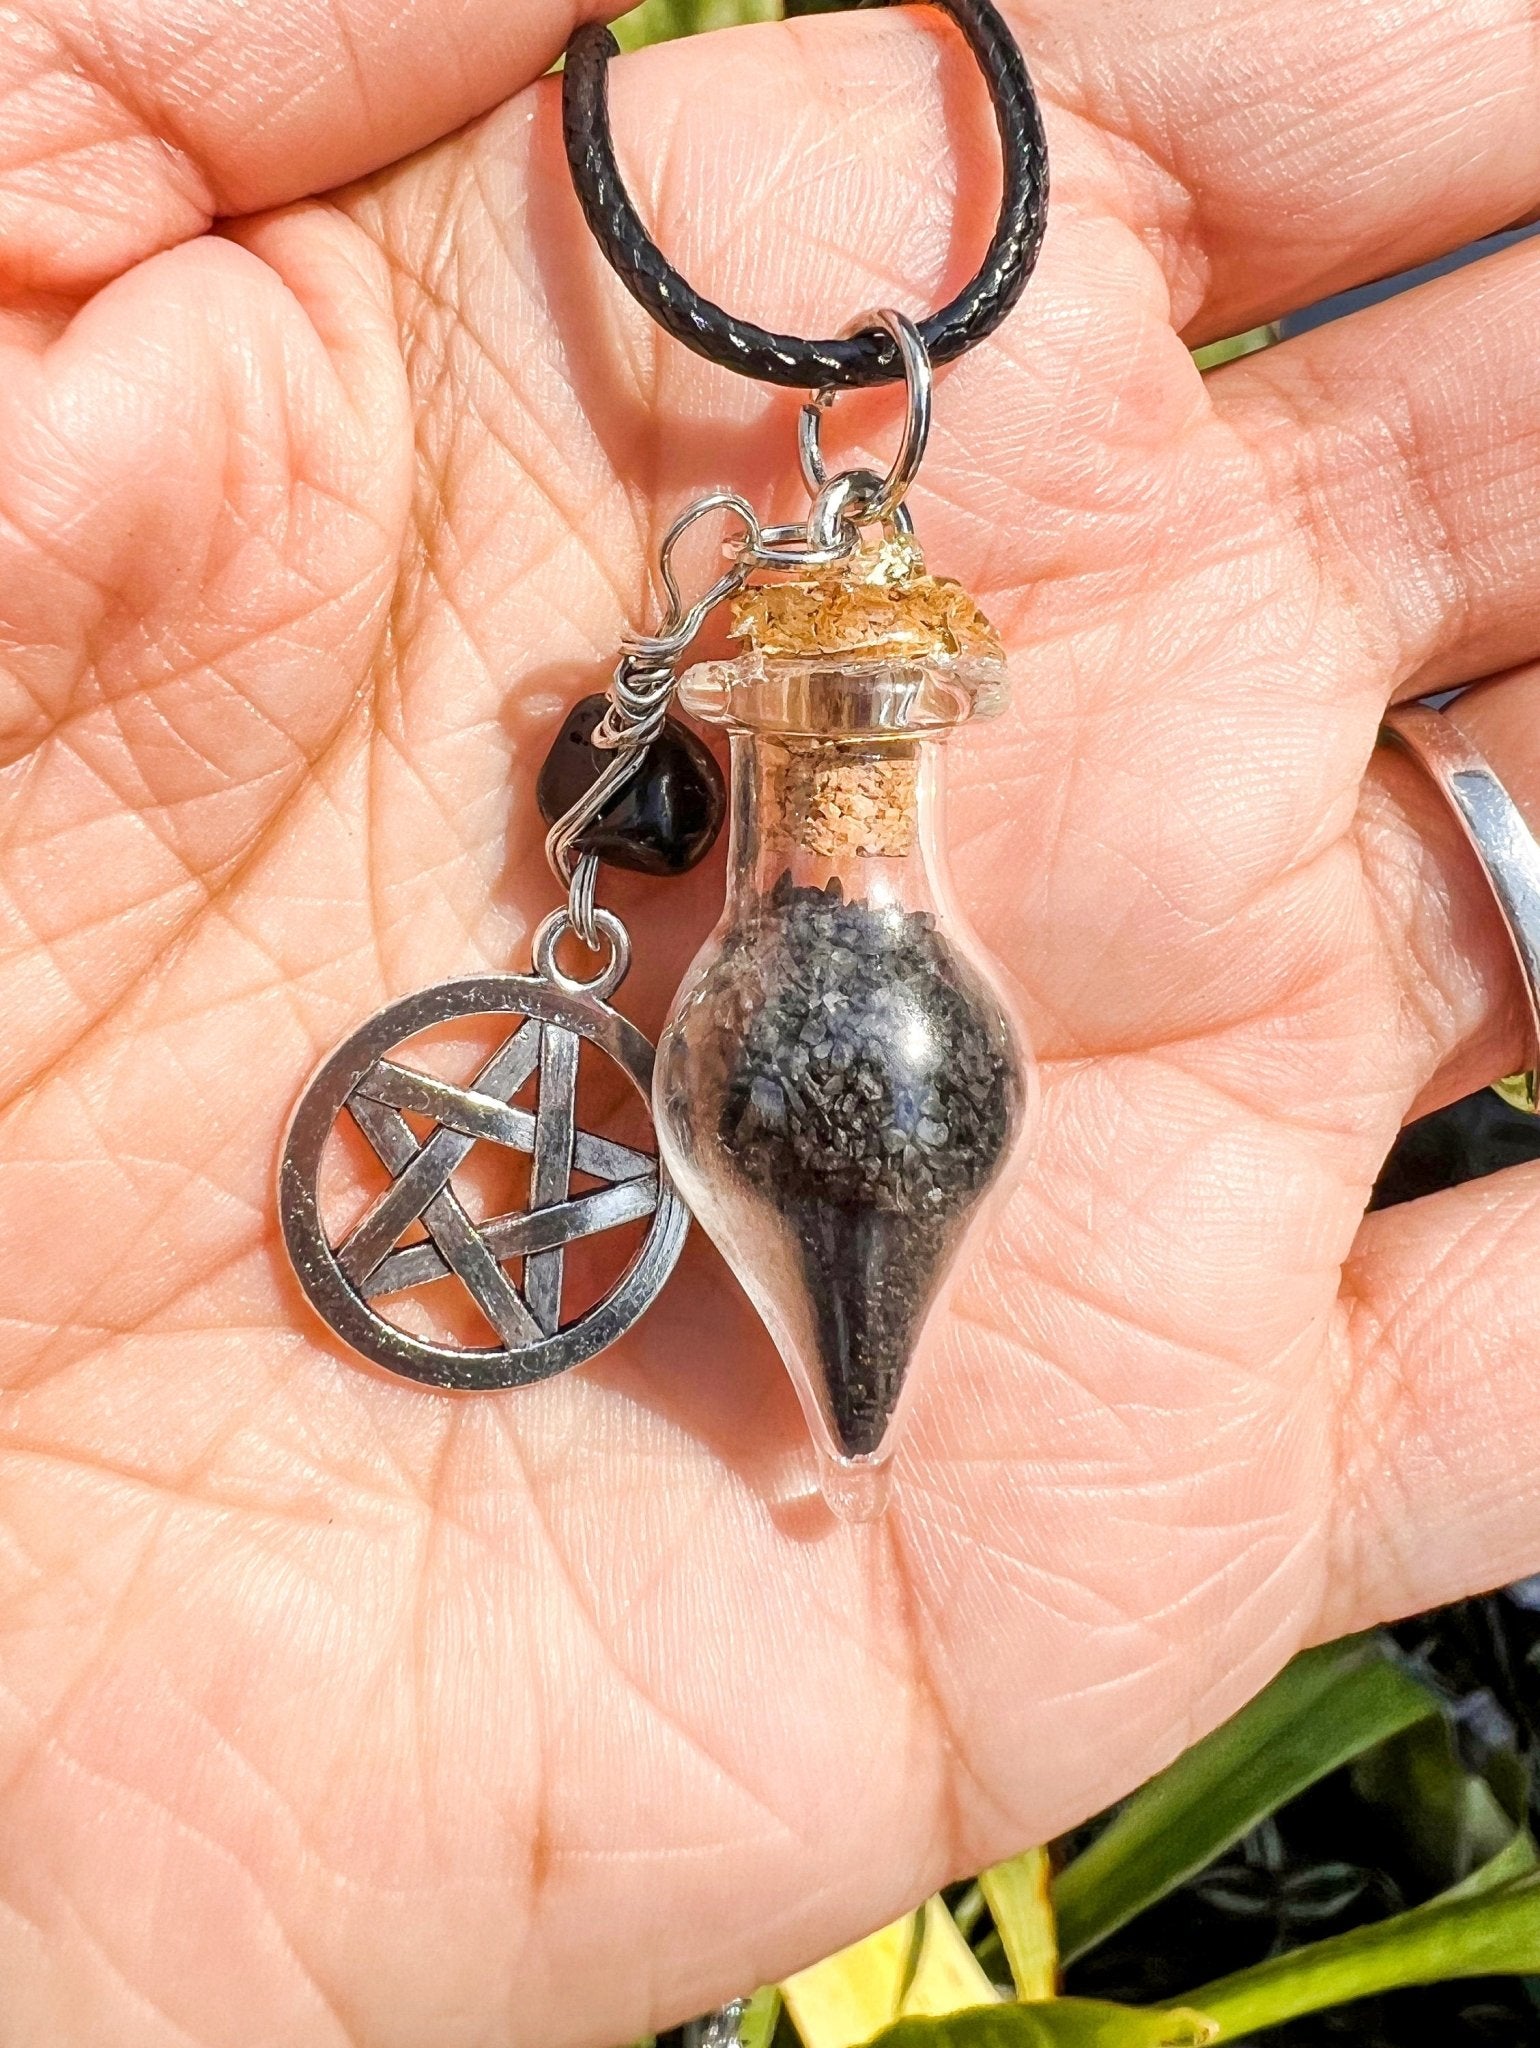 Witch Black Salt Jar Spell Necklace Protection Earrings - Wire Wrapped Black Obsidian Crystal Chip Wicca Witch Jewelry Hoodoo - MysticBluuMoonTarot